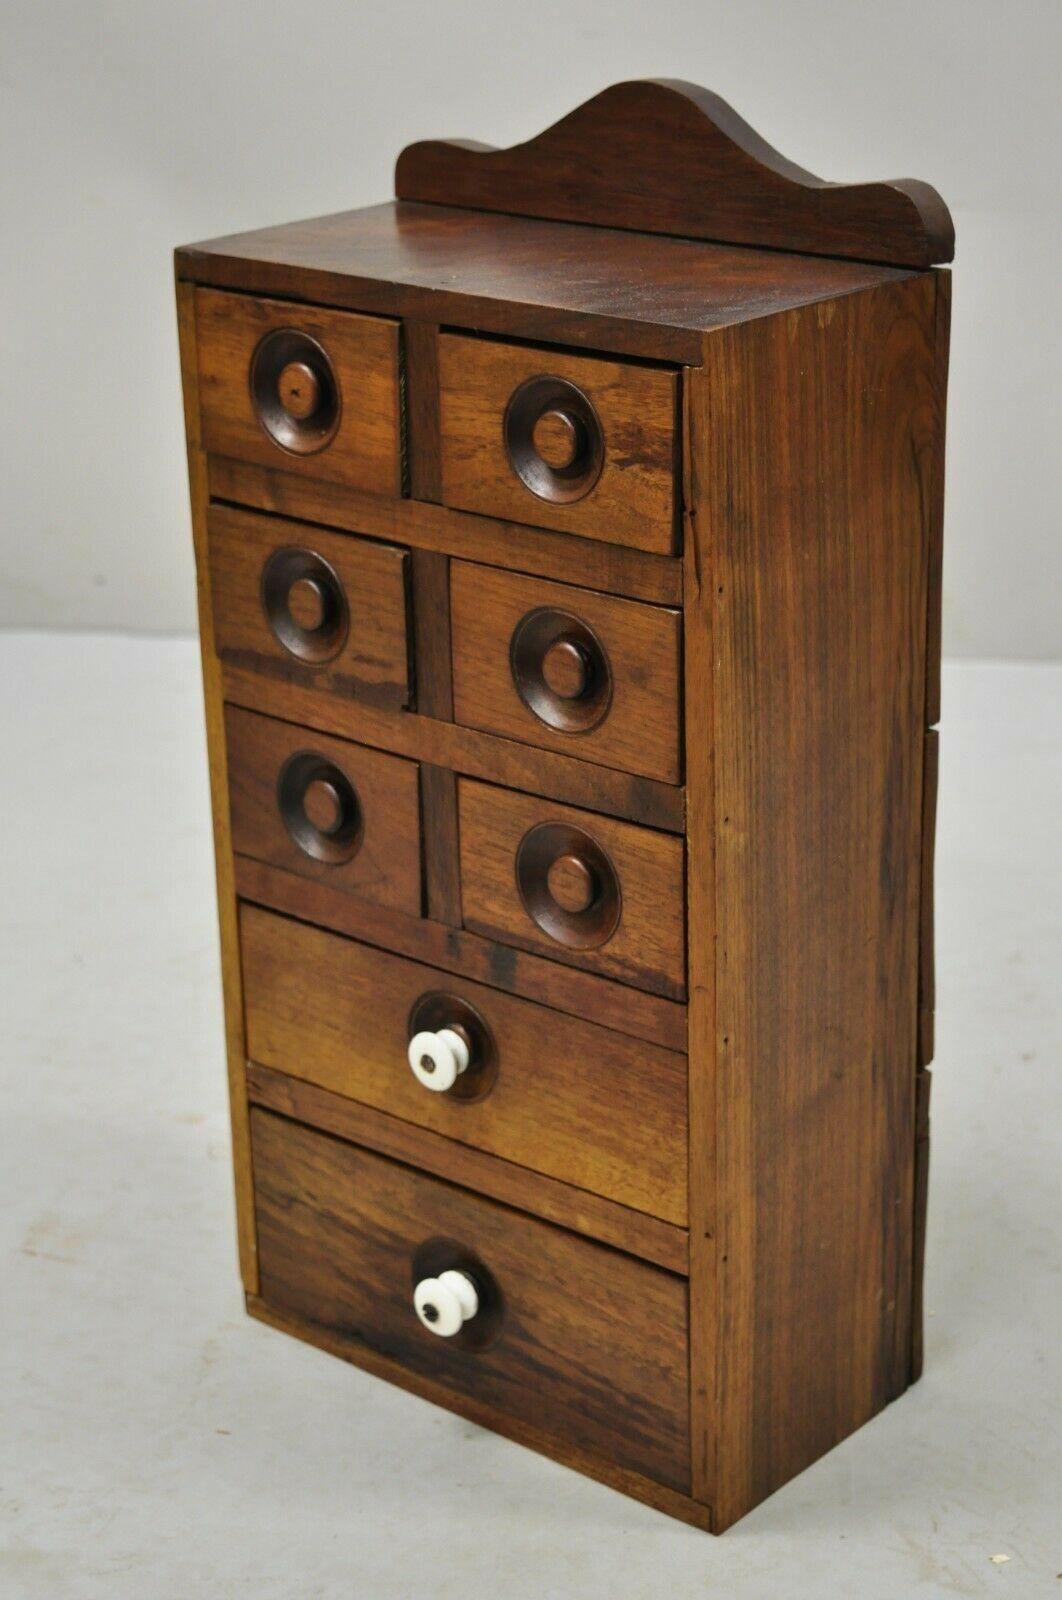 Antique Primitive walnut Spice cabinet small Apothecary chest 8 drawers. Item features beautiful wood grain, solid wood construction, distressed finish, nicely carved, 8 drawers, very nice antique item, quality American craftsmanship, great style